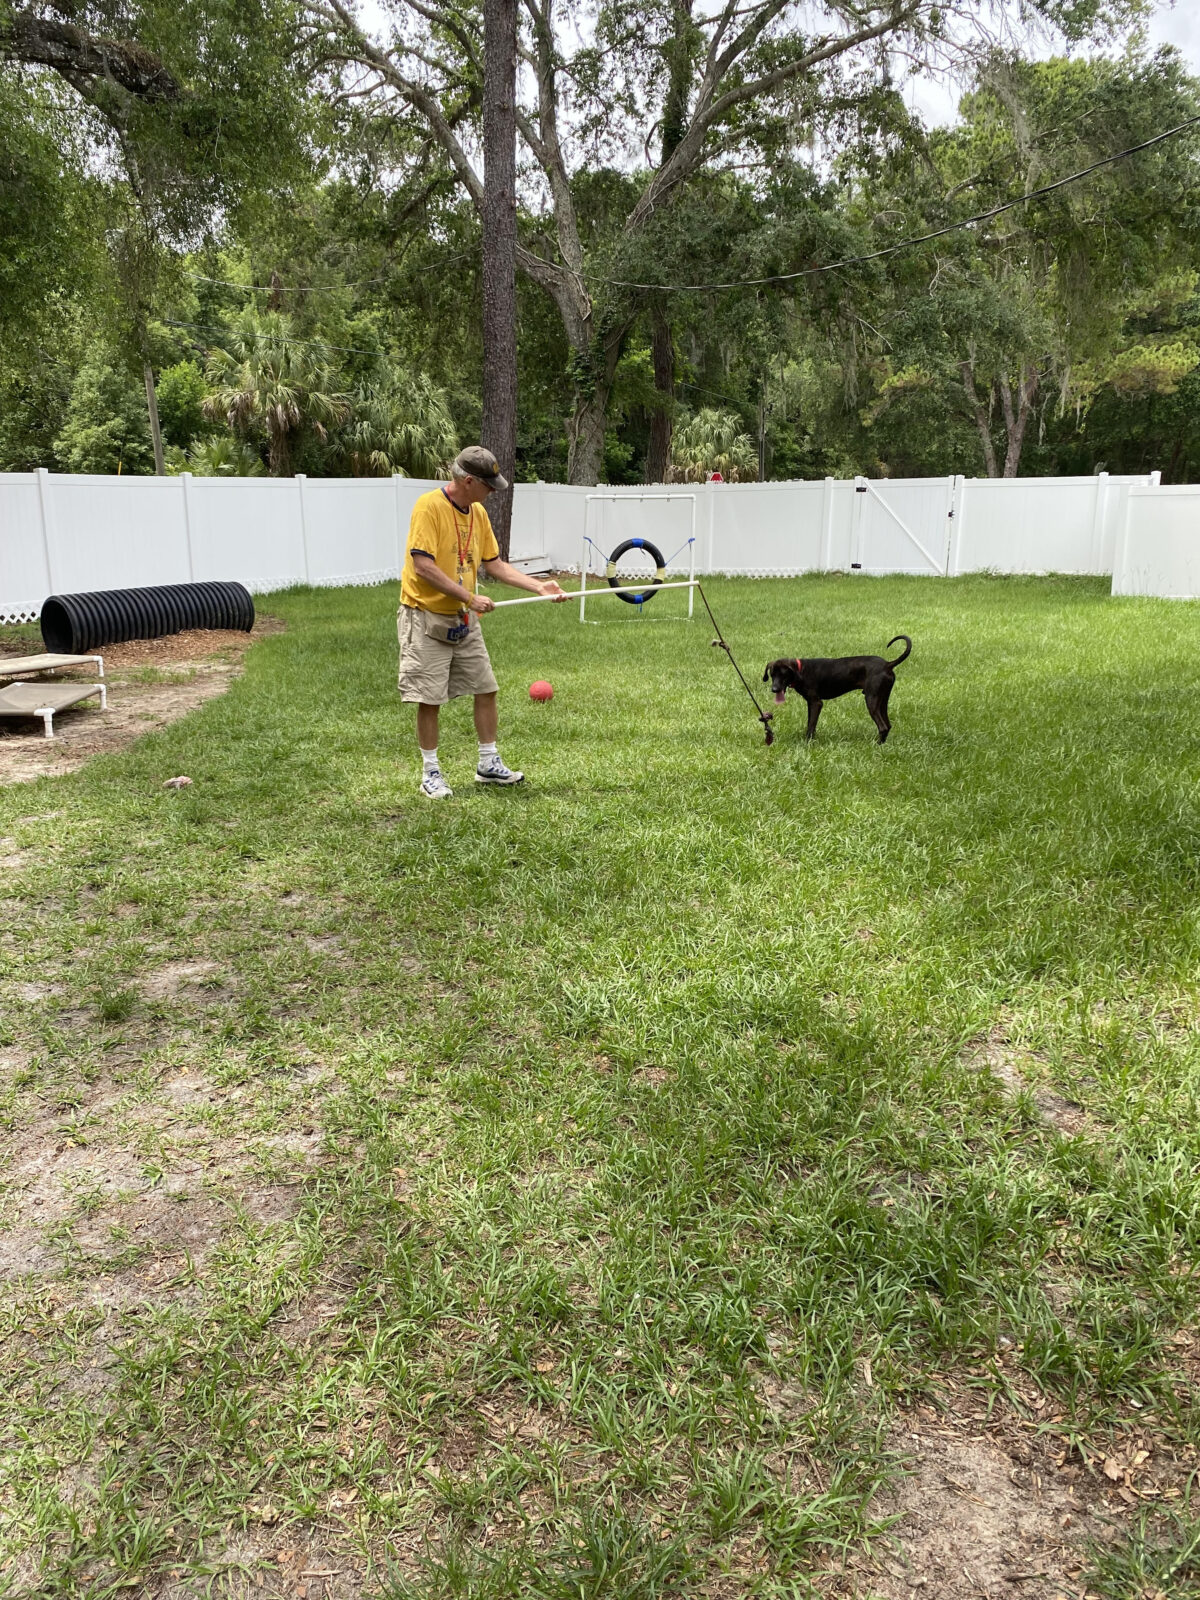 Volunteers like Ben Moser help the staff at shelters like the Humane Society of the Nature Coast ensure that the dogs get ample exercise and play-time in spacious, outdoor spaces. 